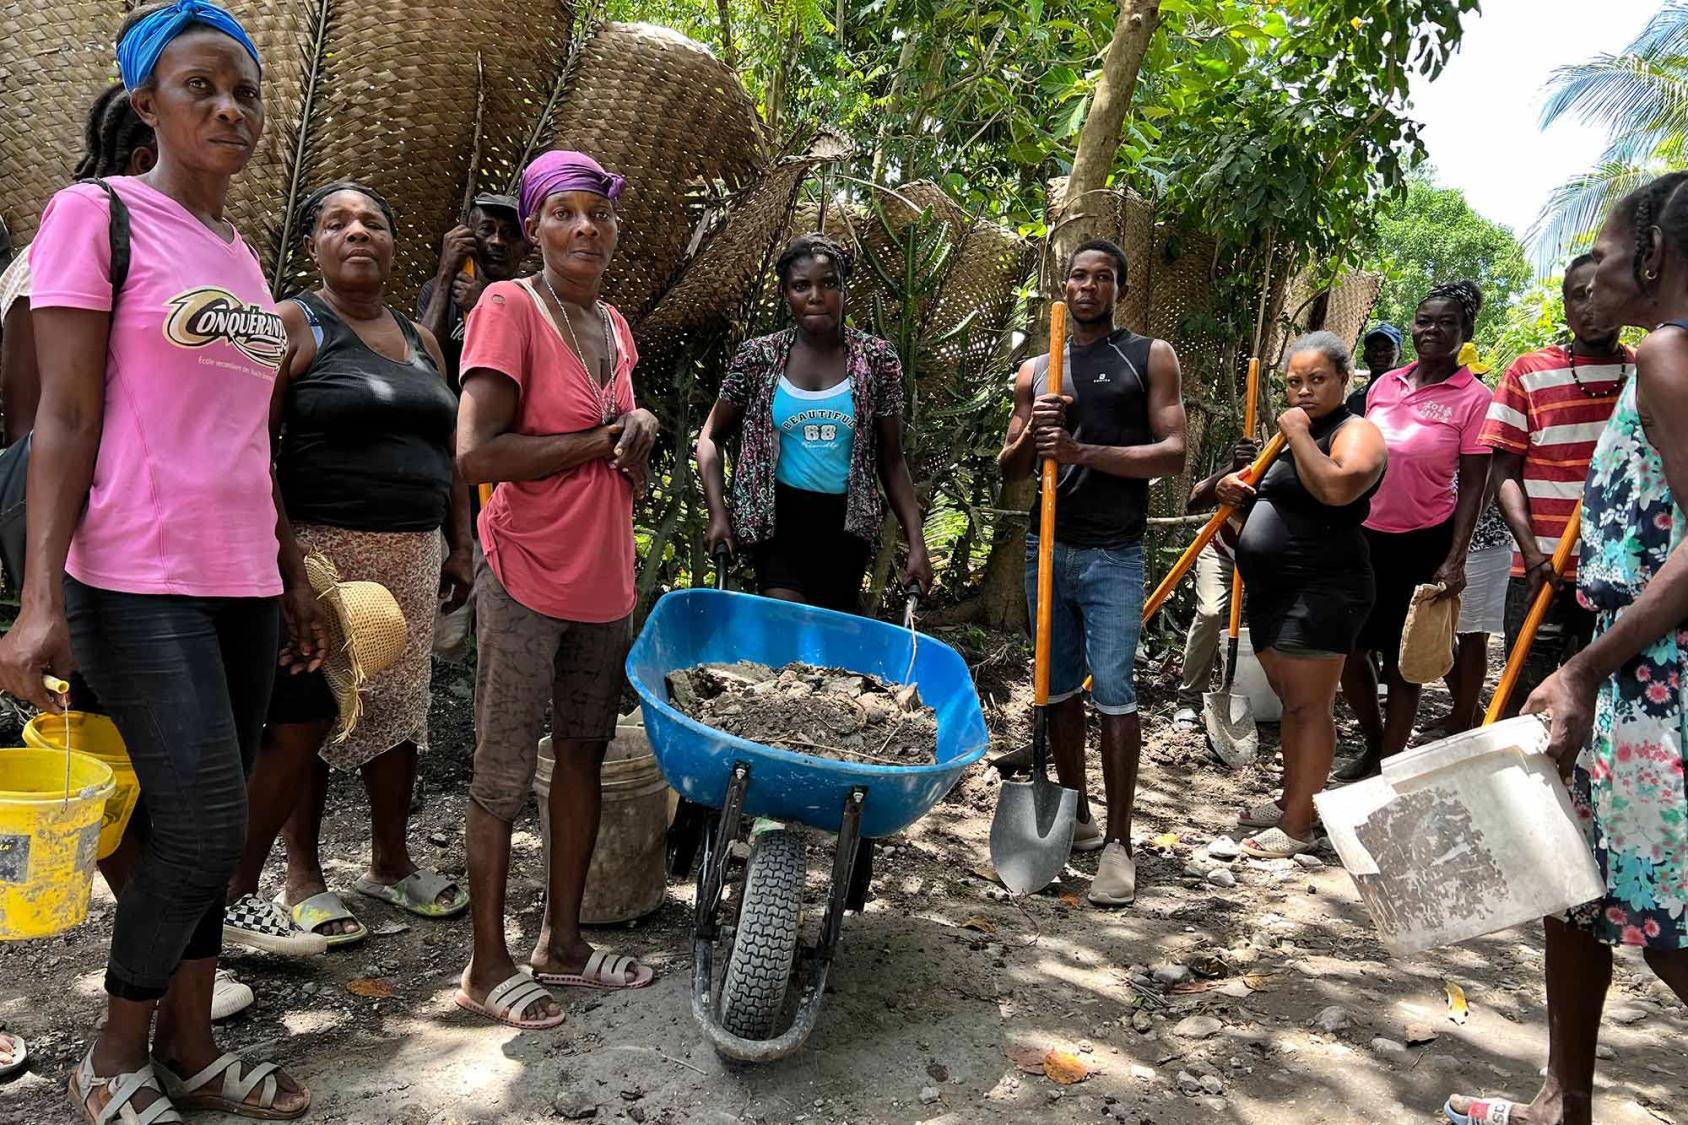 A group of Haitian men and women stand in a semicircle outside, holding various tools and looking sadly at the camera. In the center is a blue wheelbarrow.